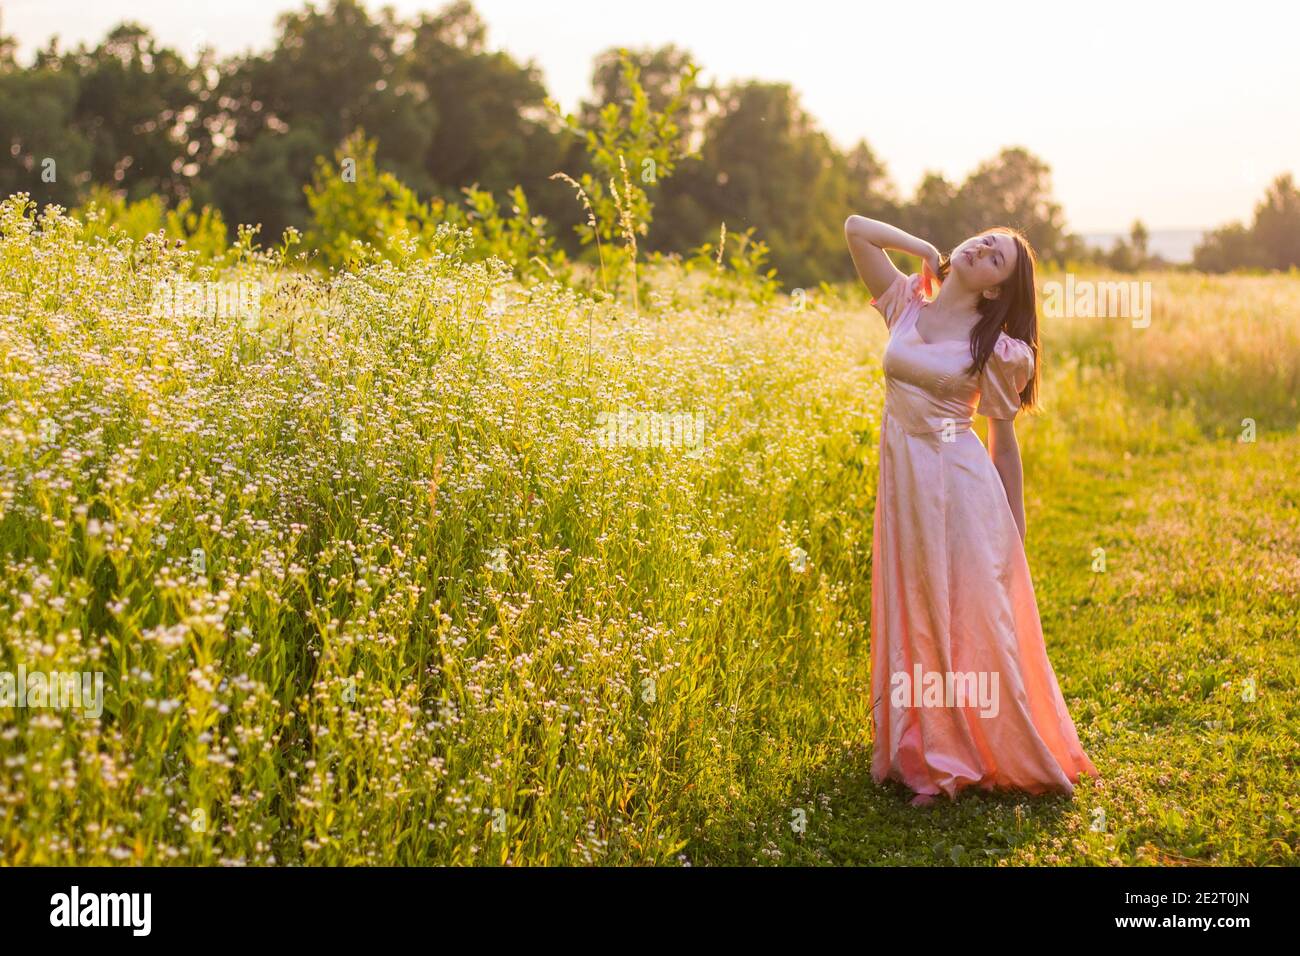 girl standing in the field in a pink dress Stock Photo